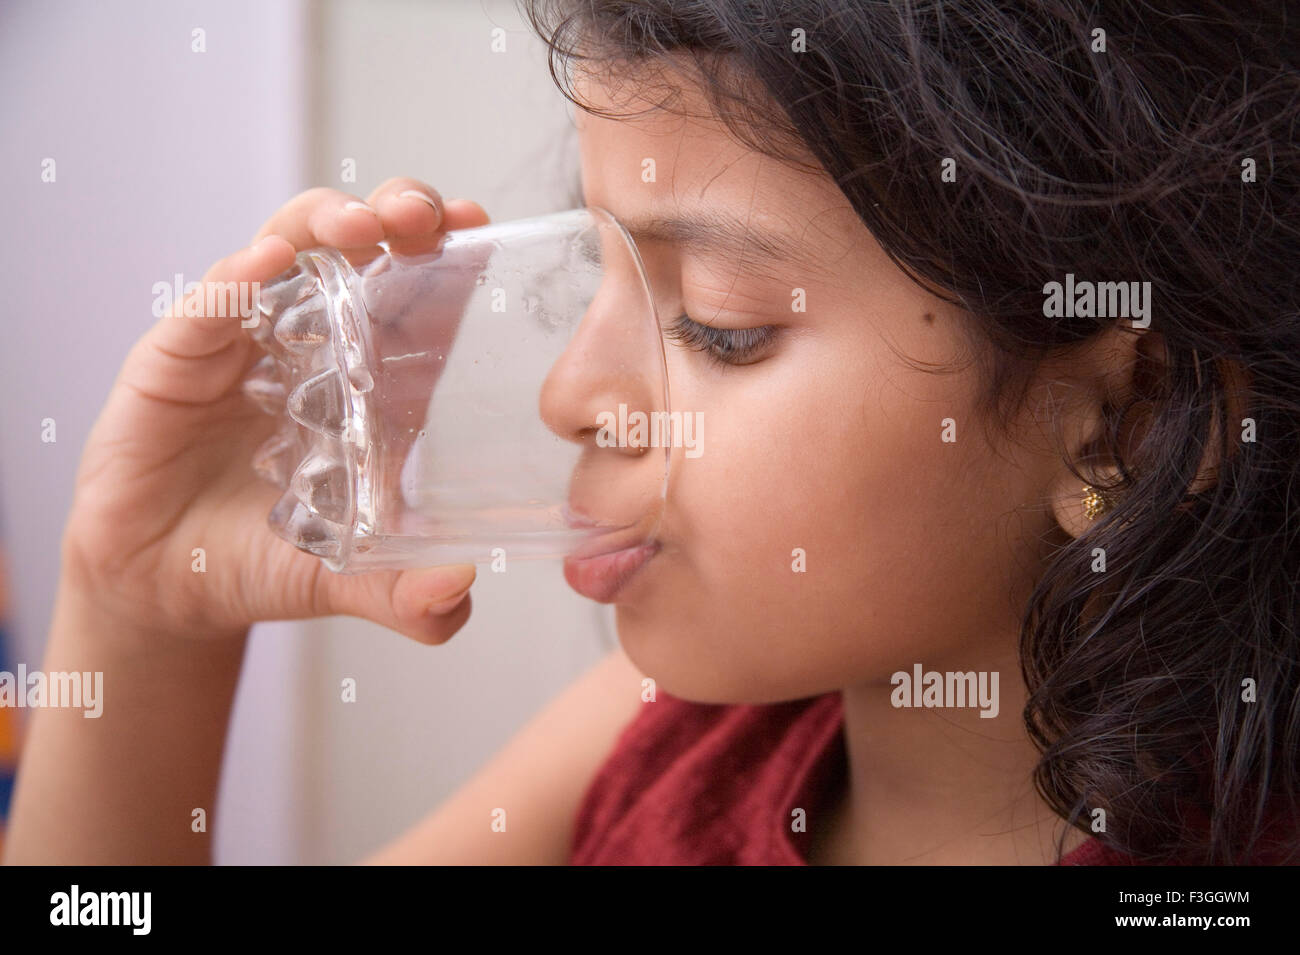 Girl drinking water - Model Released # 202 Stock Photo